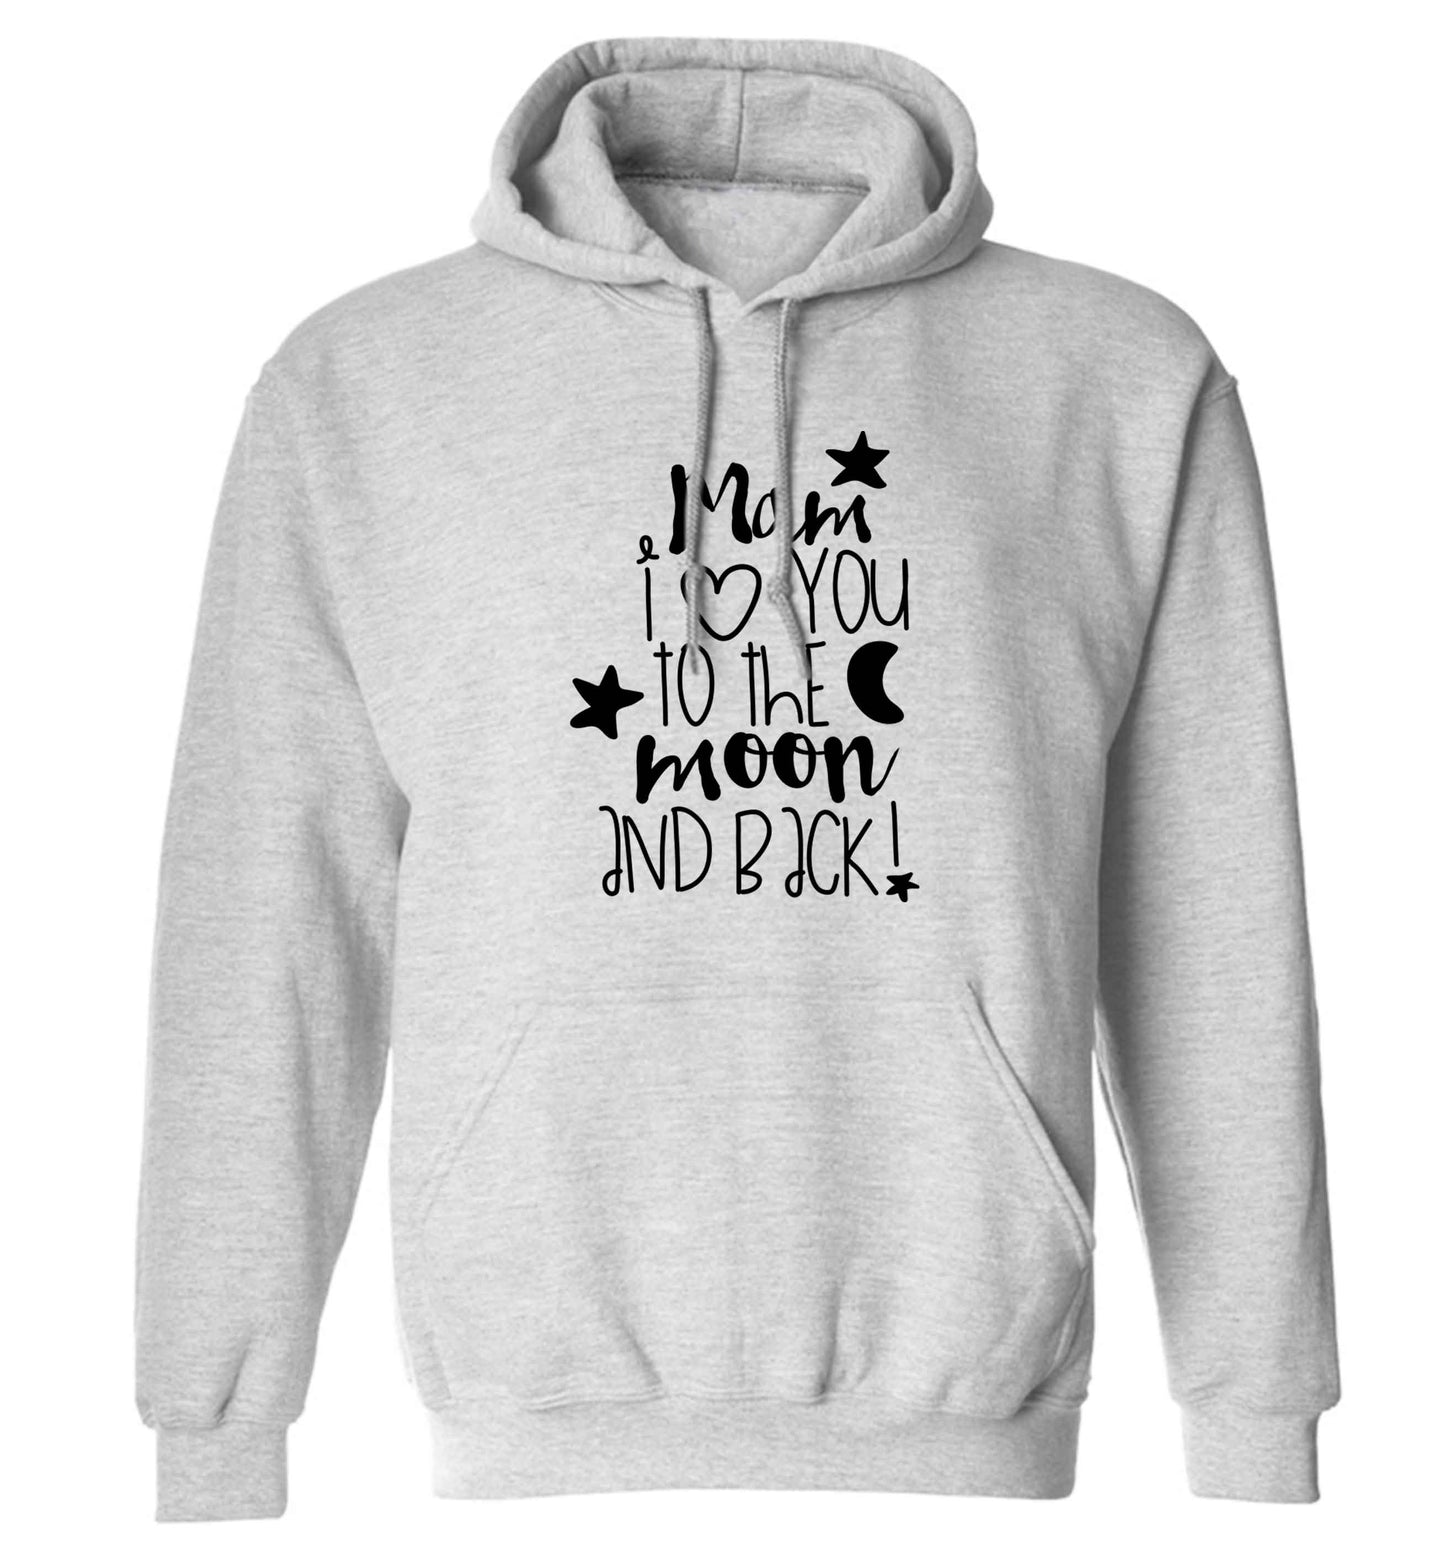 Mam I love you to the moon and back adults unisex grey hoodie 2XL